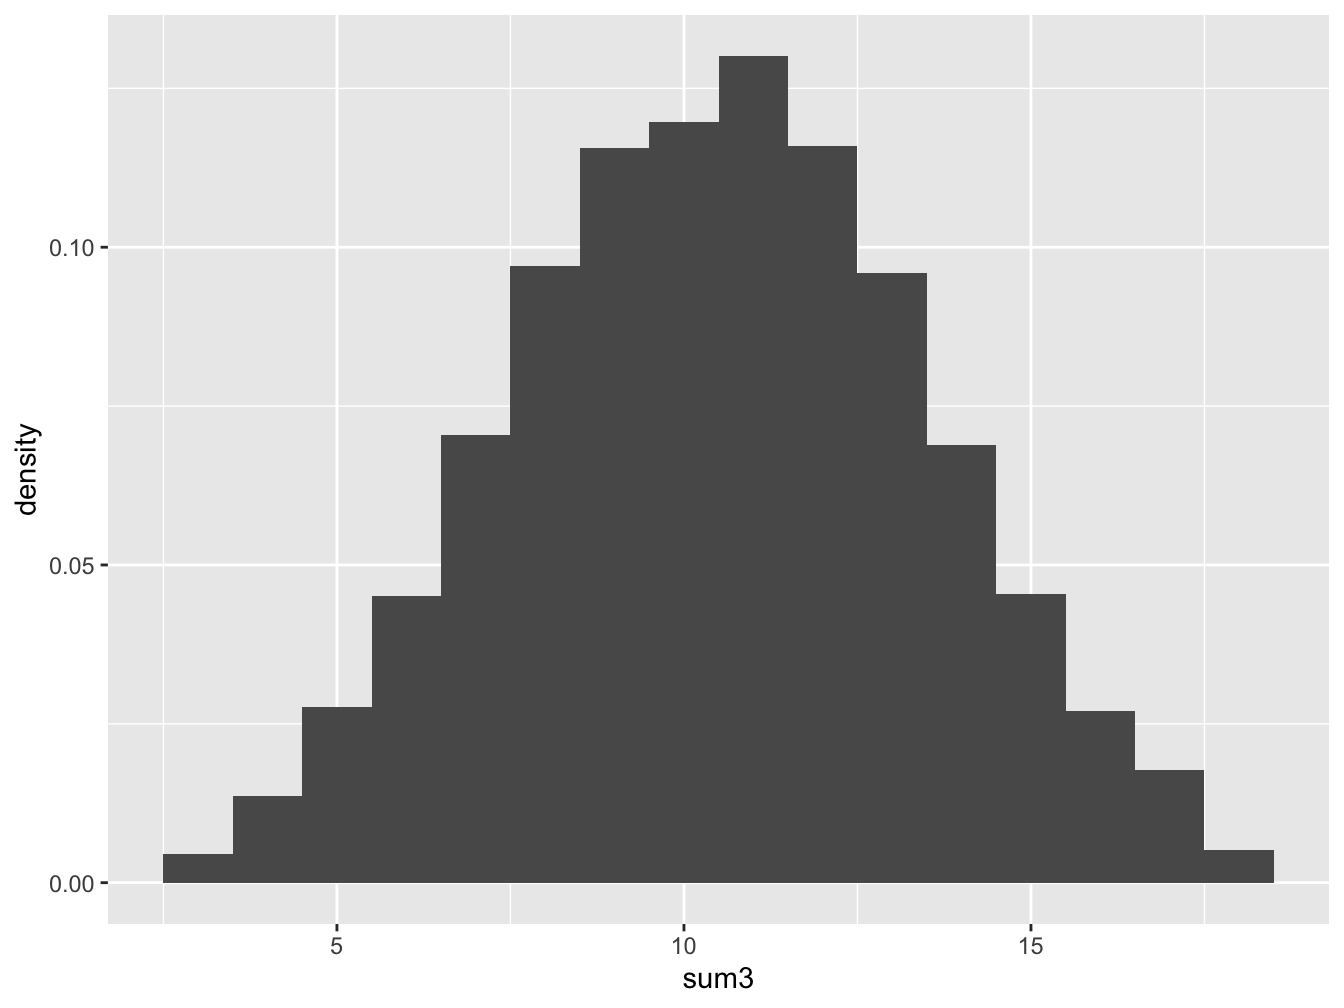 Histogram for Tossing Three Dice